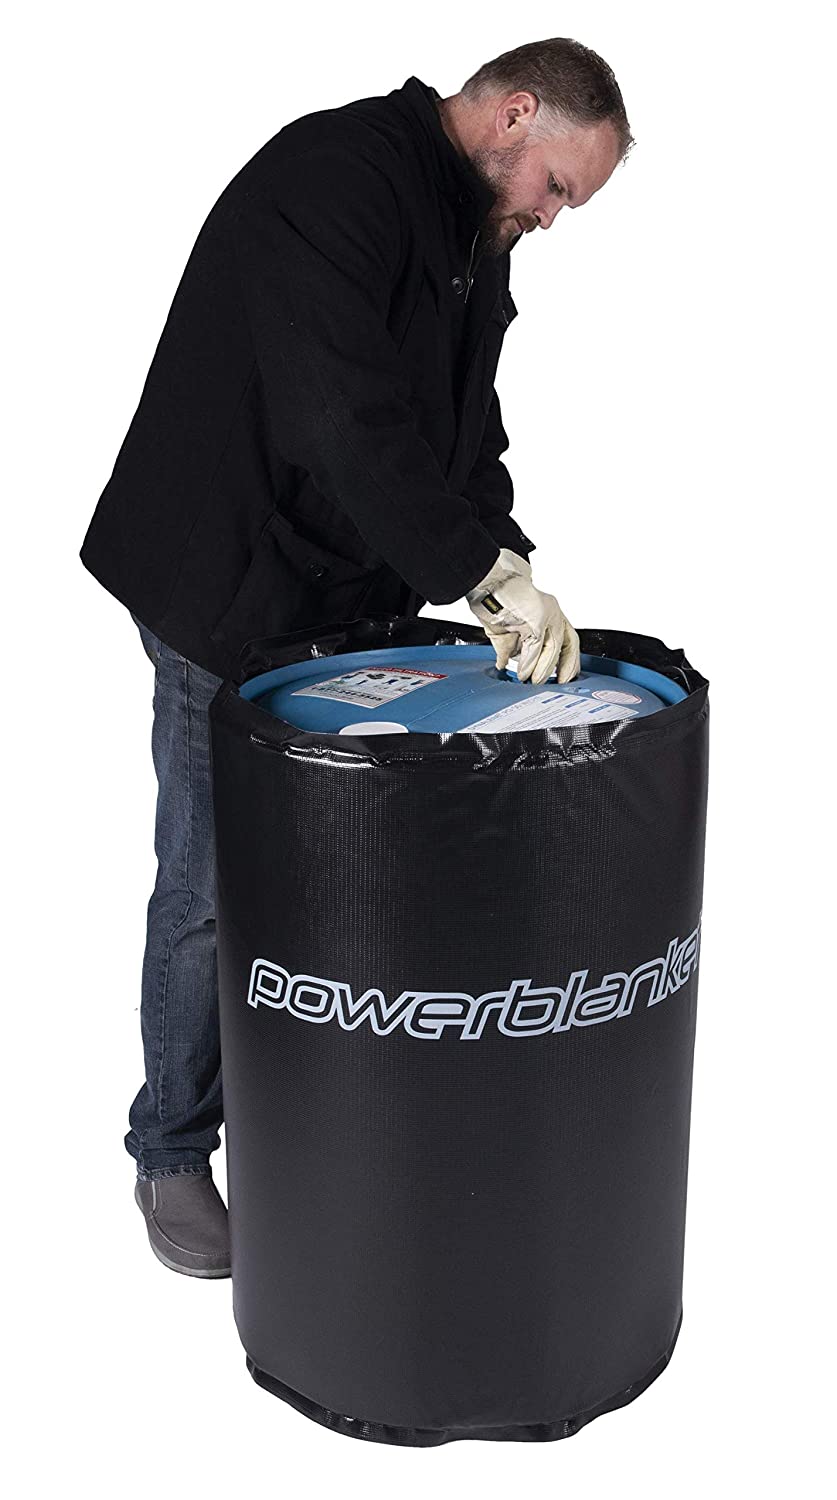 Powerblanket, Powerblanket BH15RR 15 Gallon Insulated Drum Heating Blanket 100°F Fixed New